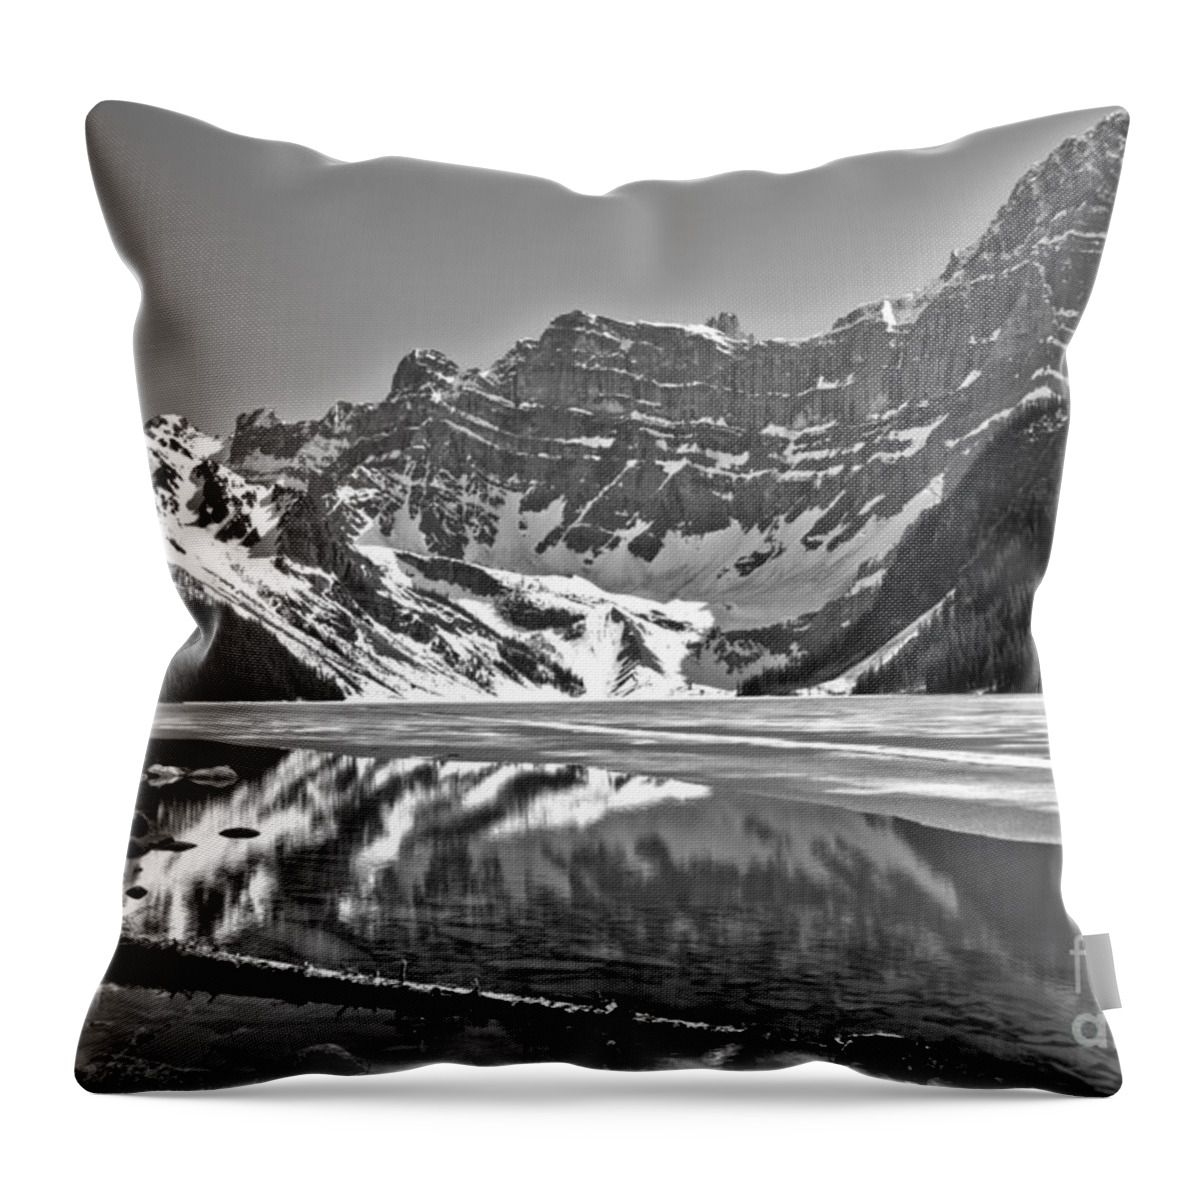 Chephren Lake Throw Pillow featuring the photograph Chehren Lake Reflections Black And White by Adam Jewell